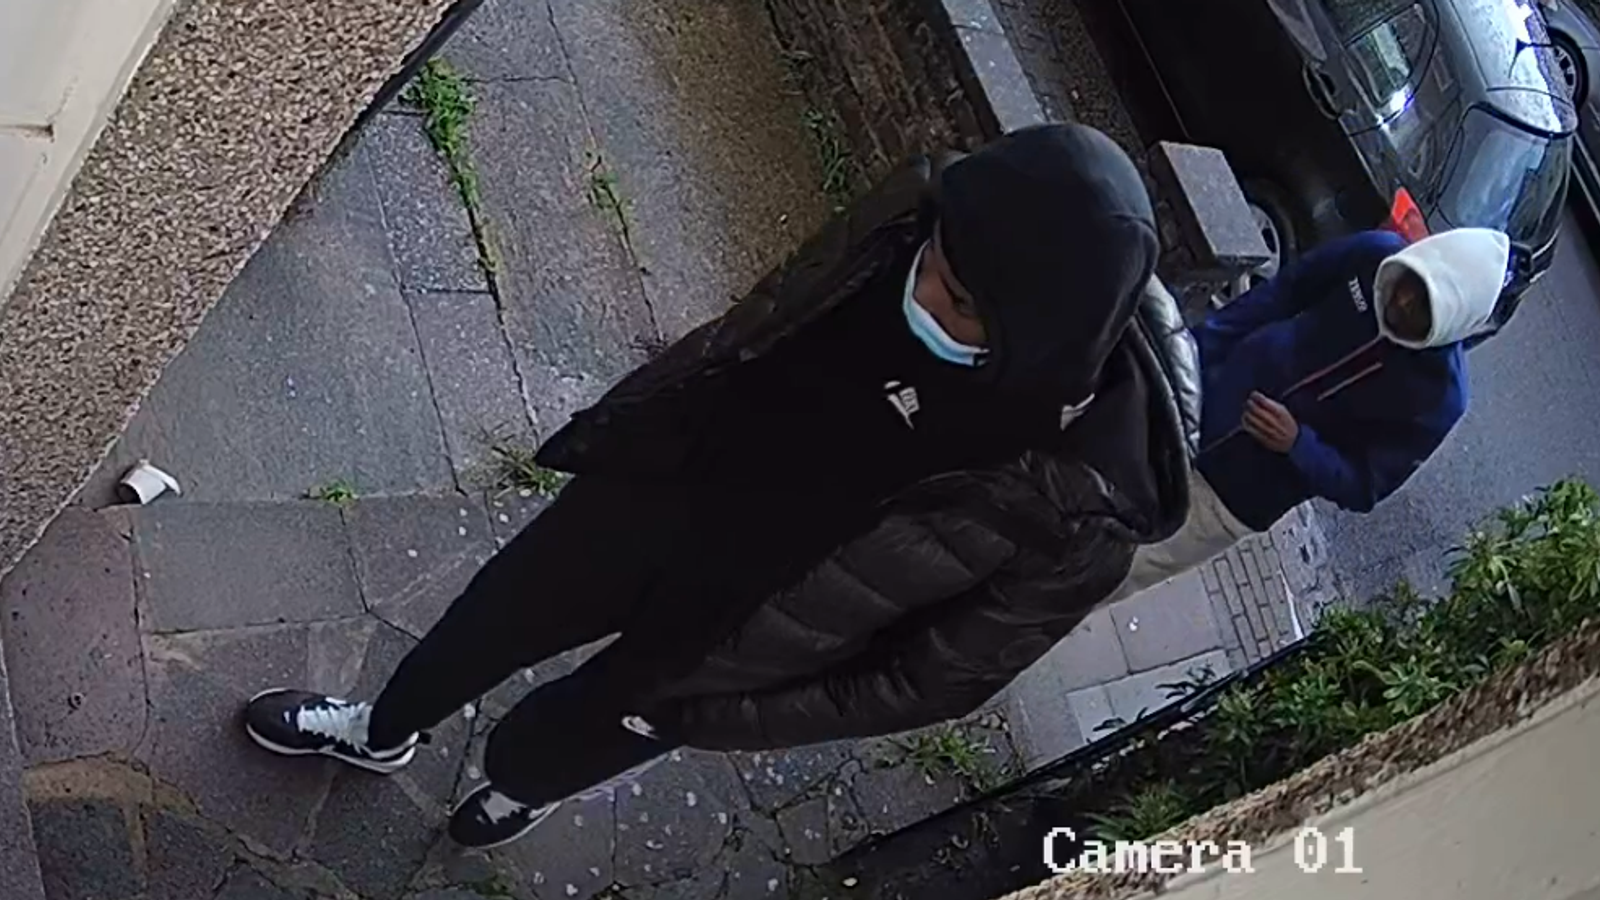 Appeal issued after men break into home of woman and threaten her at knifepoint while she's holding her child